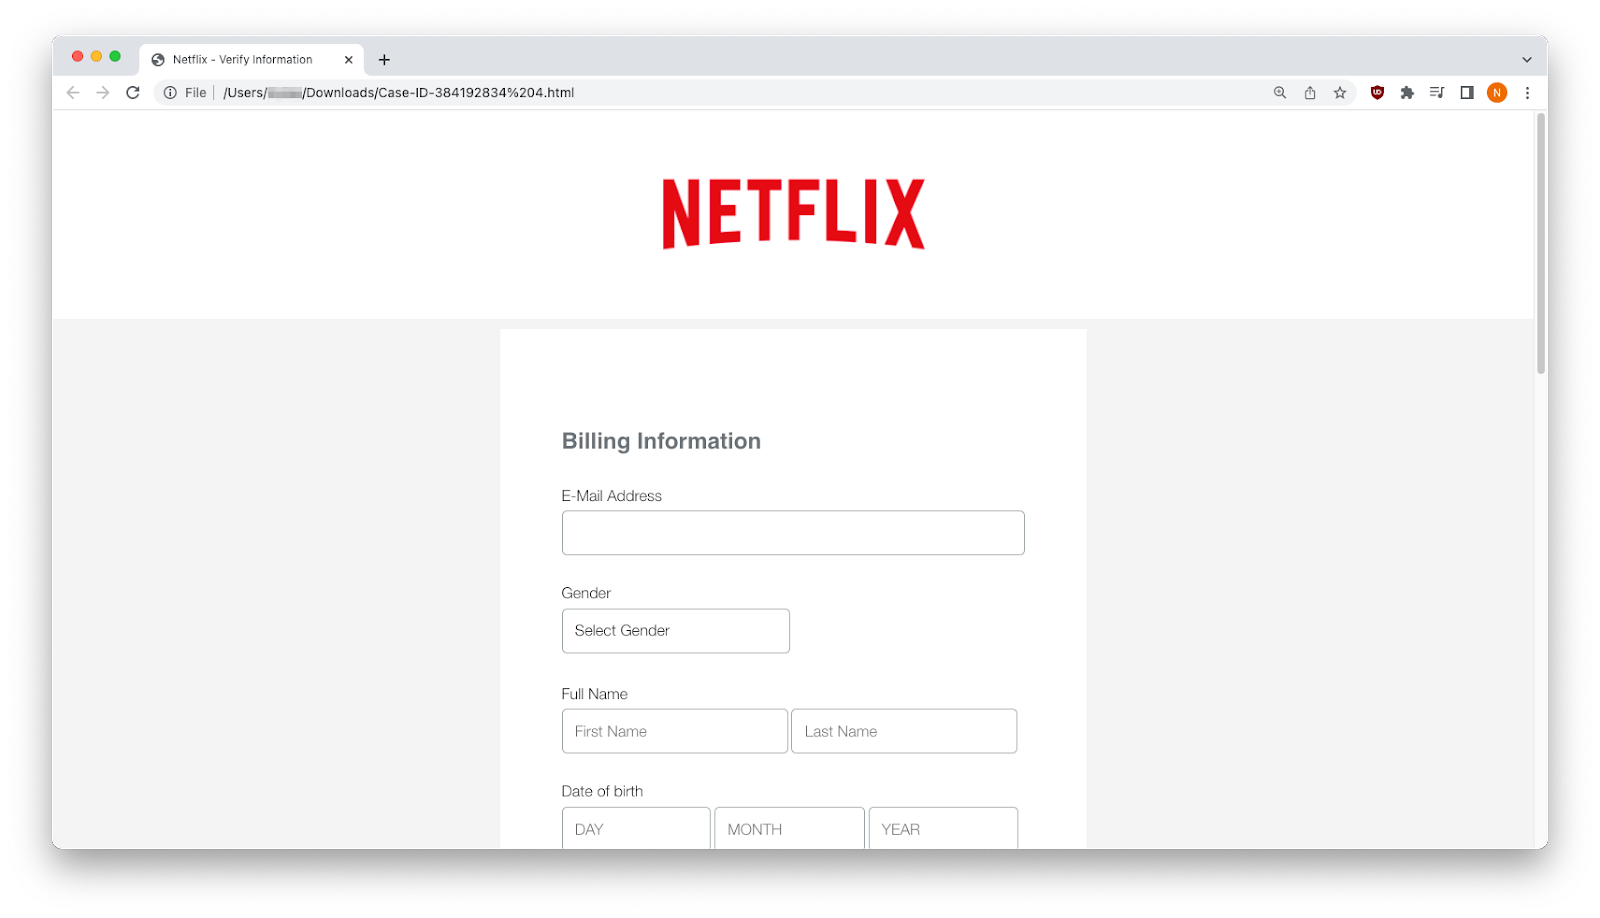 Fresh Phish: Netflix Bad Actors Go Behind the Scenes to Stage a Credential Harvesting Heist